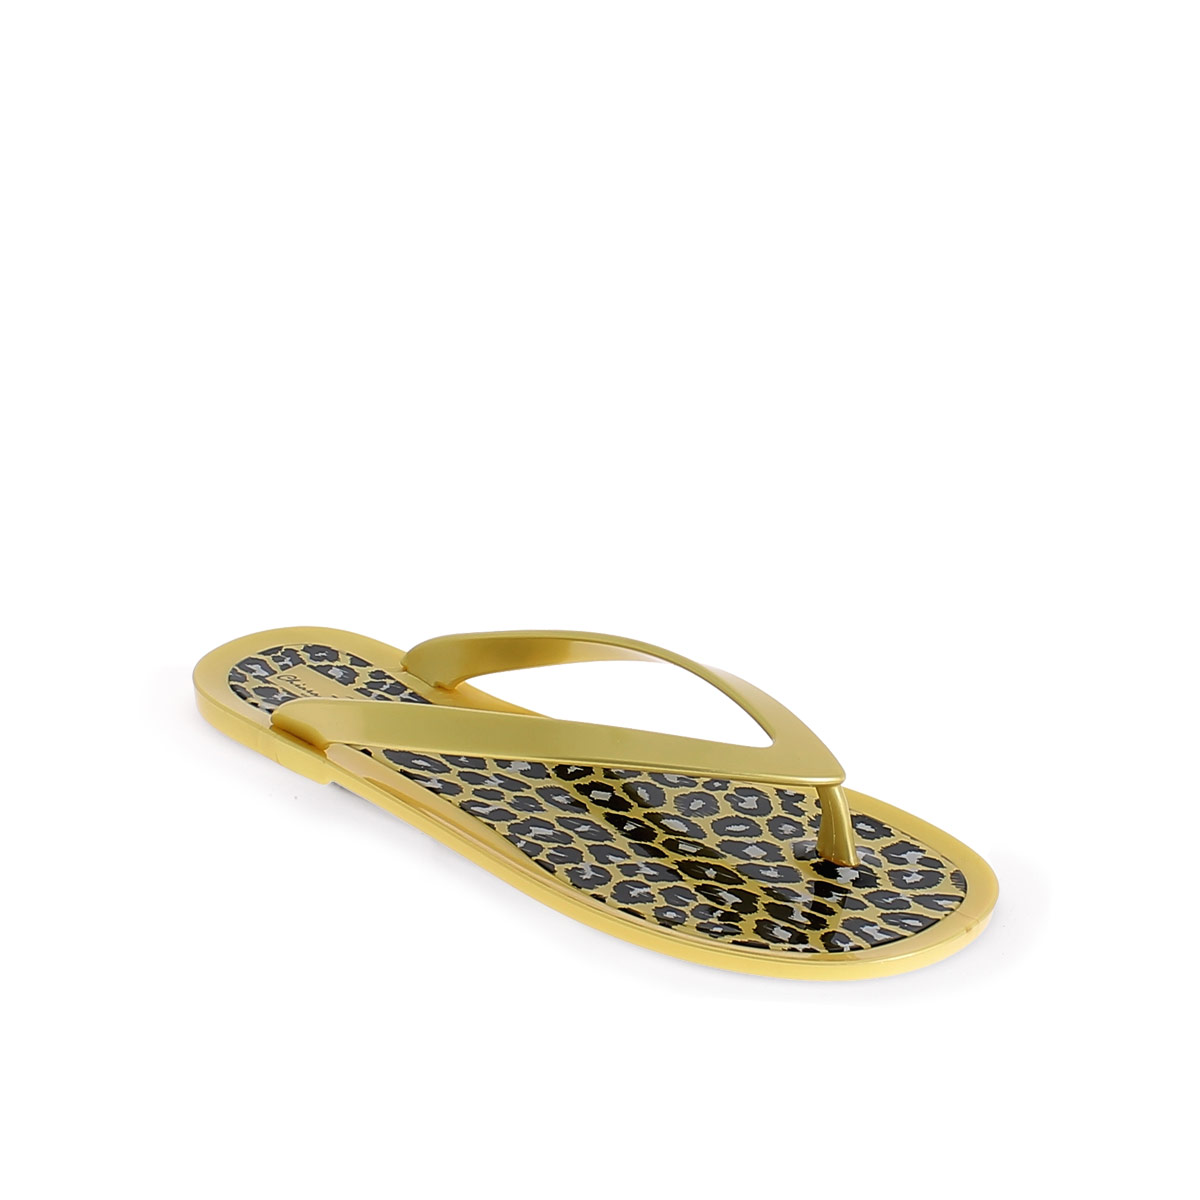 Pvc thong slipper with leopard printing insole 